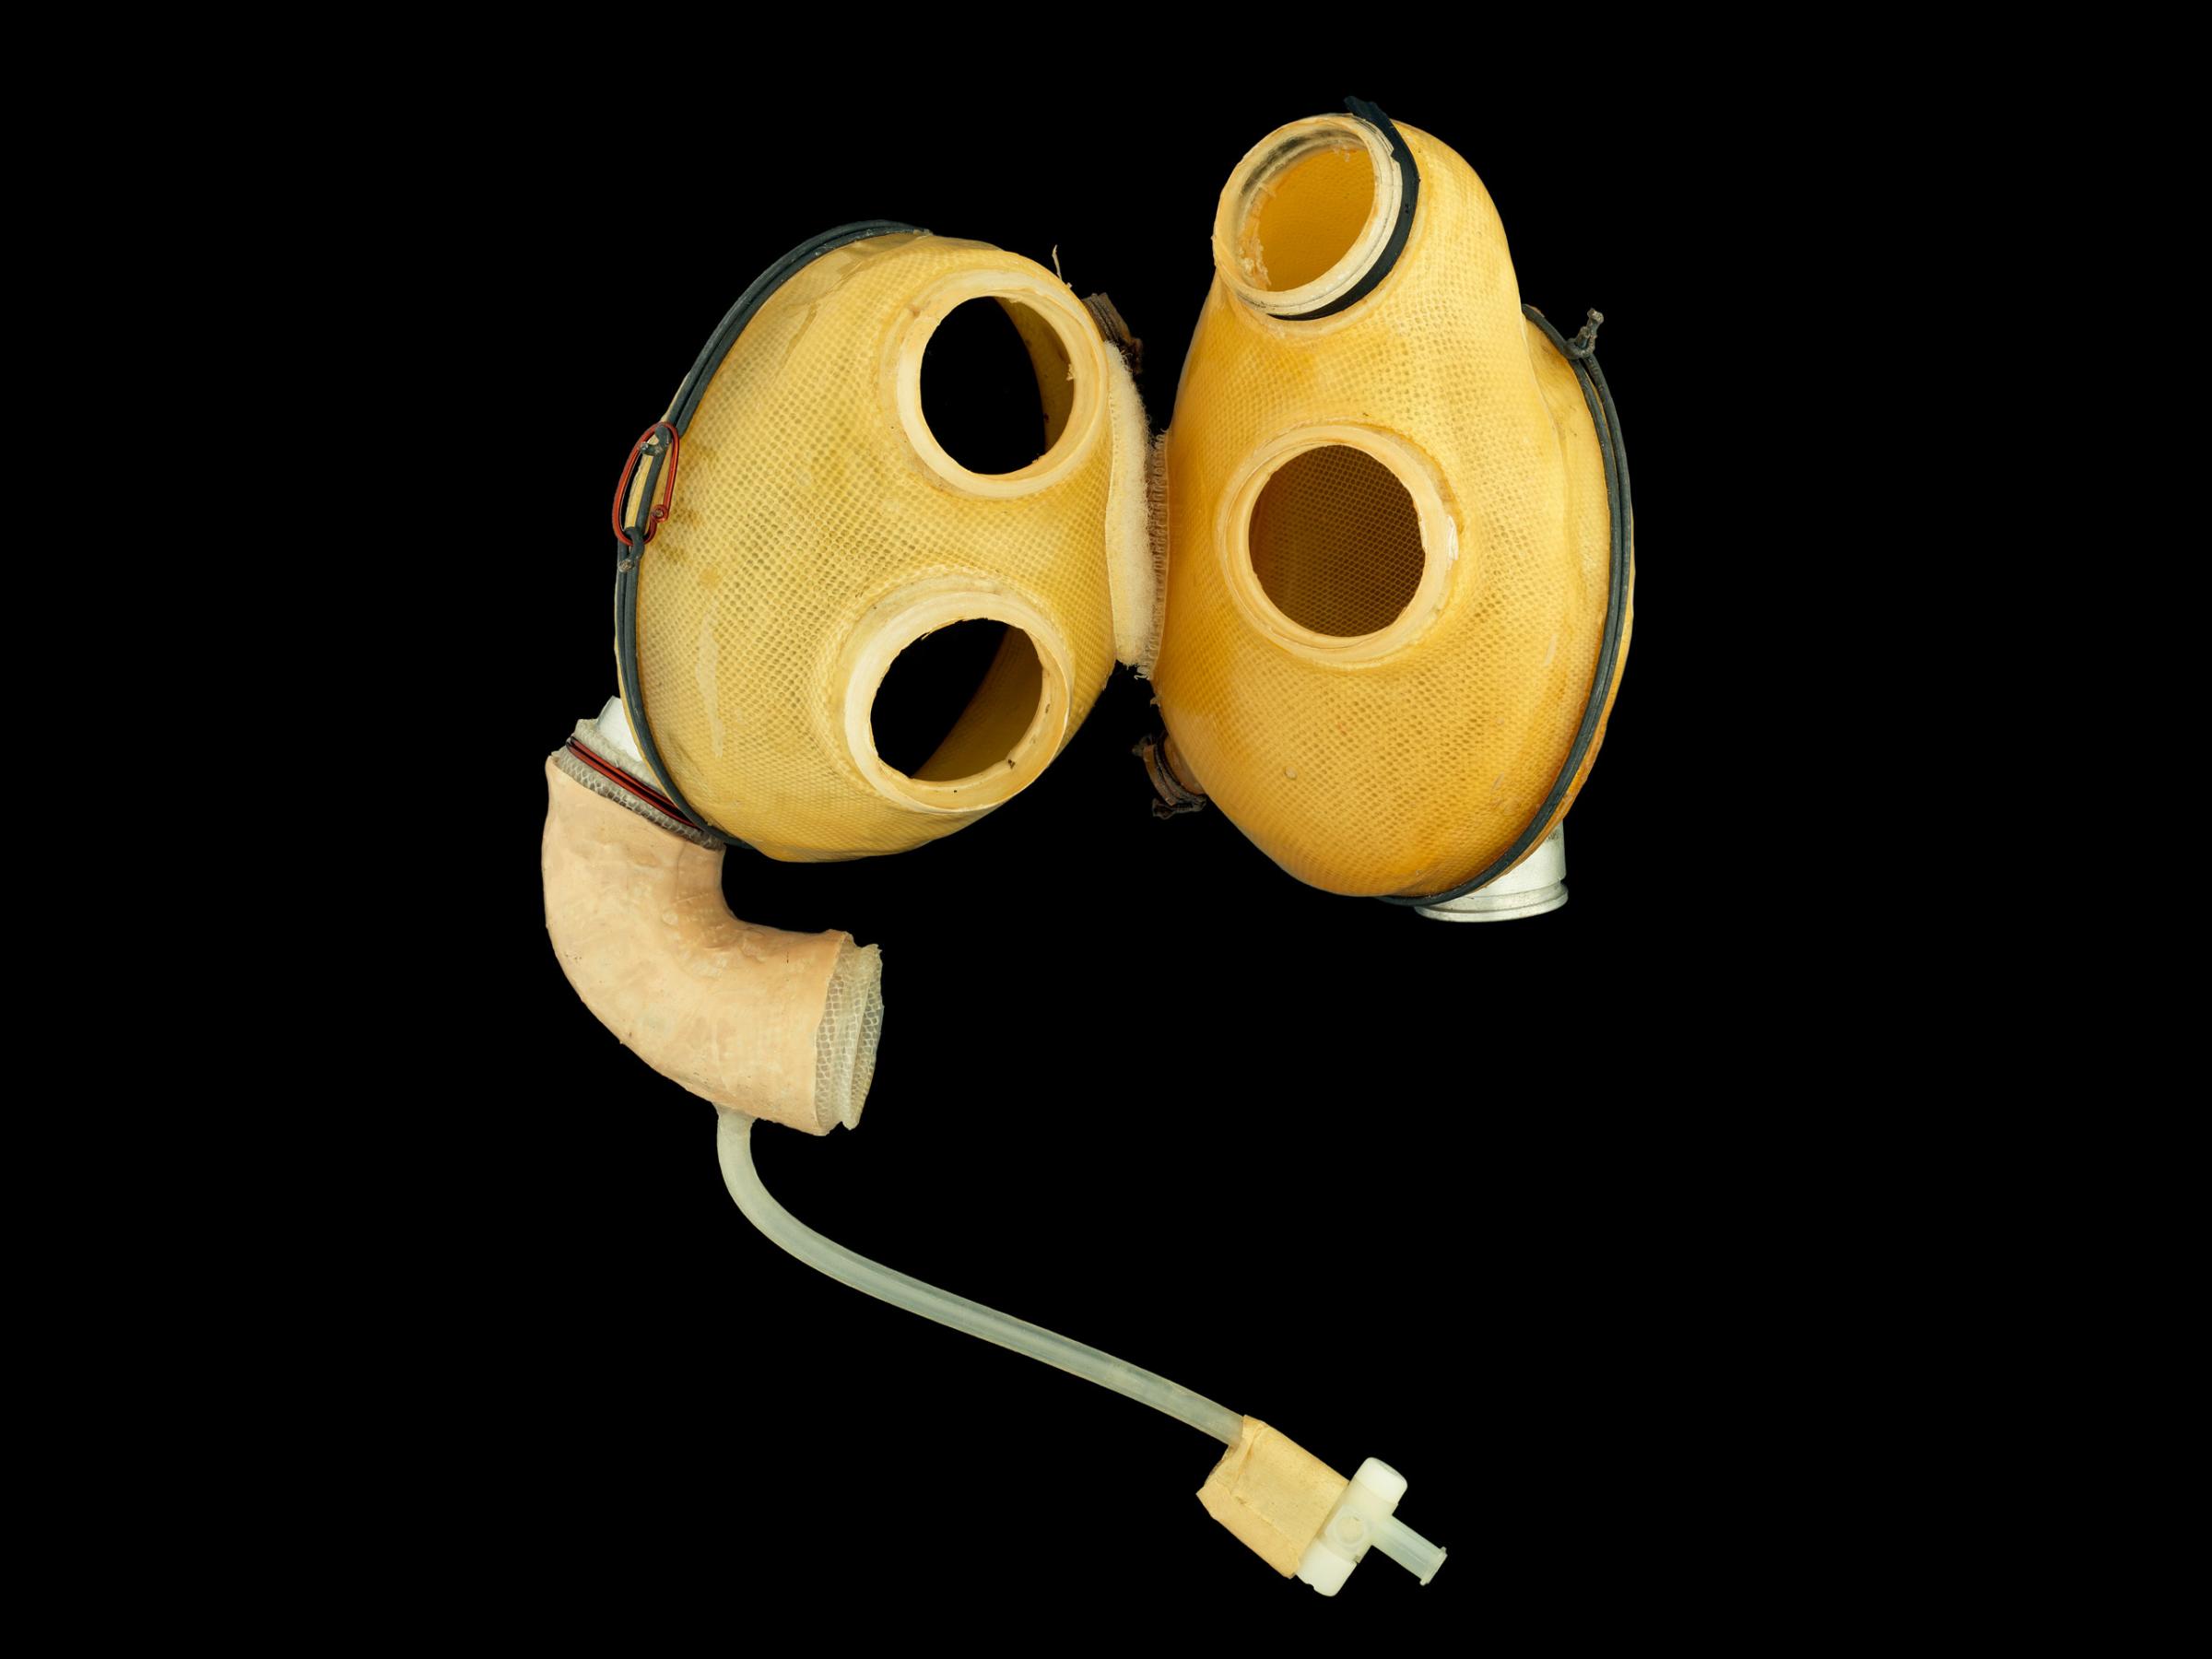 Artificial Heart, 1977: Robert Jarvik, M.D., Prototype. This electrohydraulic artificial heart is a prototype for what became the Jarvik-7 Total Artificial Heart, which was first implanted into a human in December 1982 at the University of Utah Medical Center. The two sides of the device are connected with Velcro.